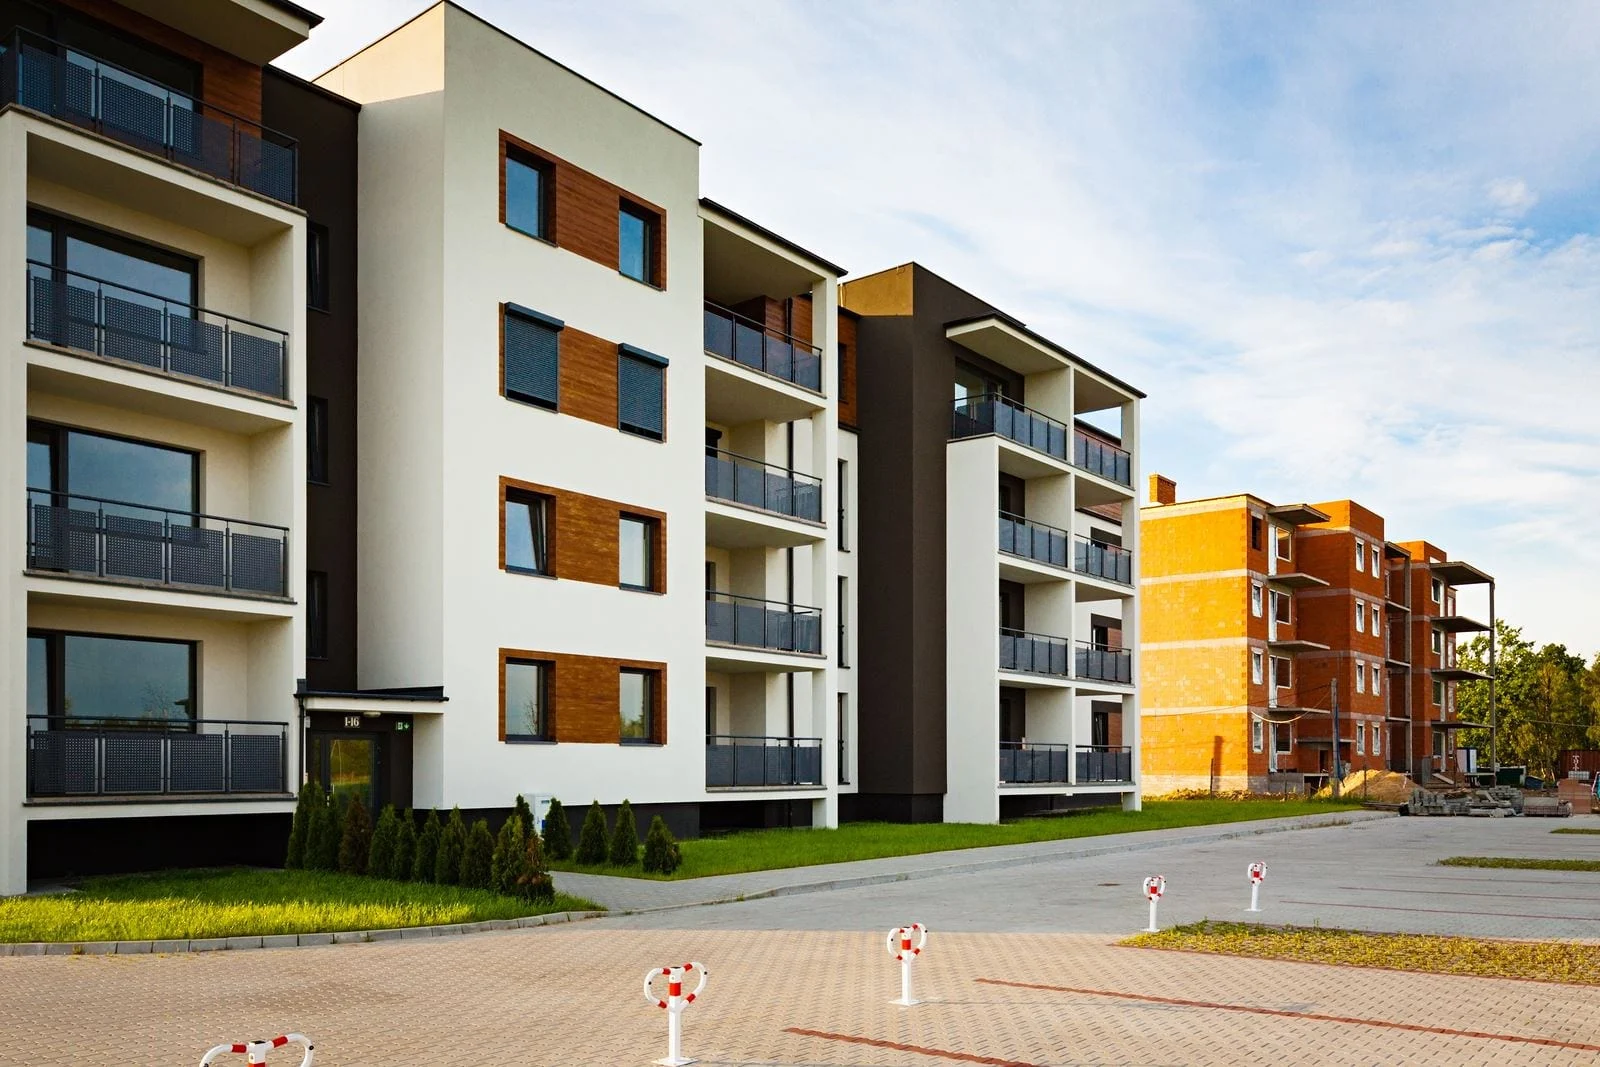 Now Is The Time to Invest In Multifamily Real Estate